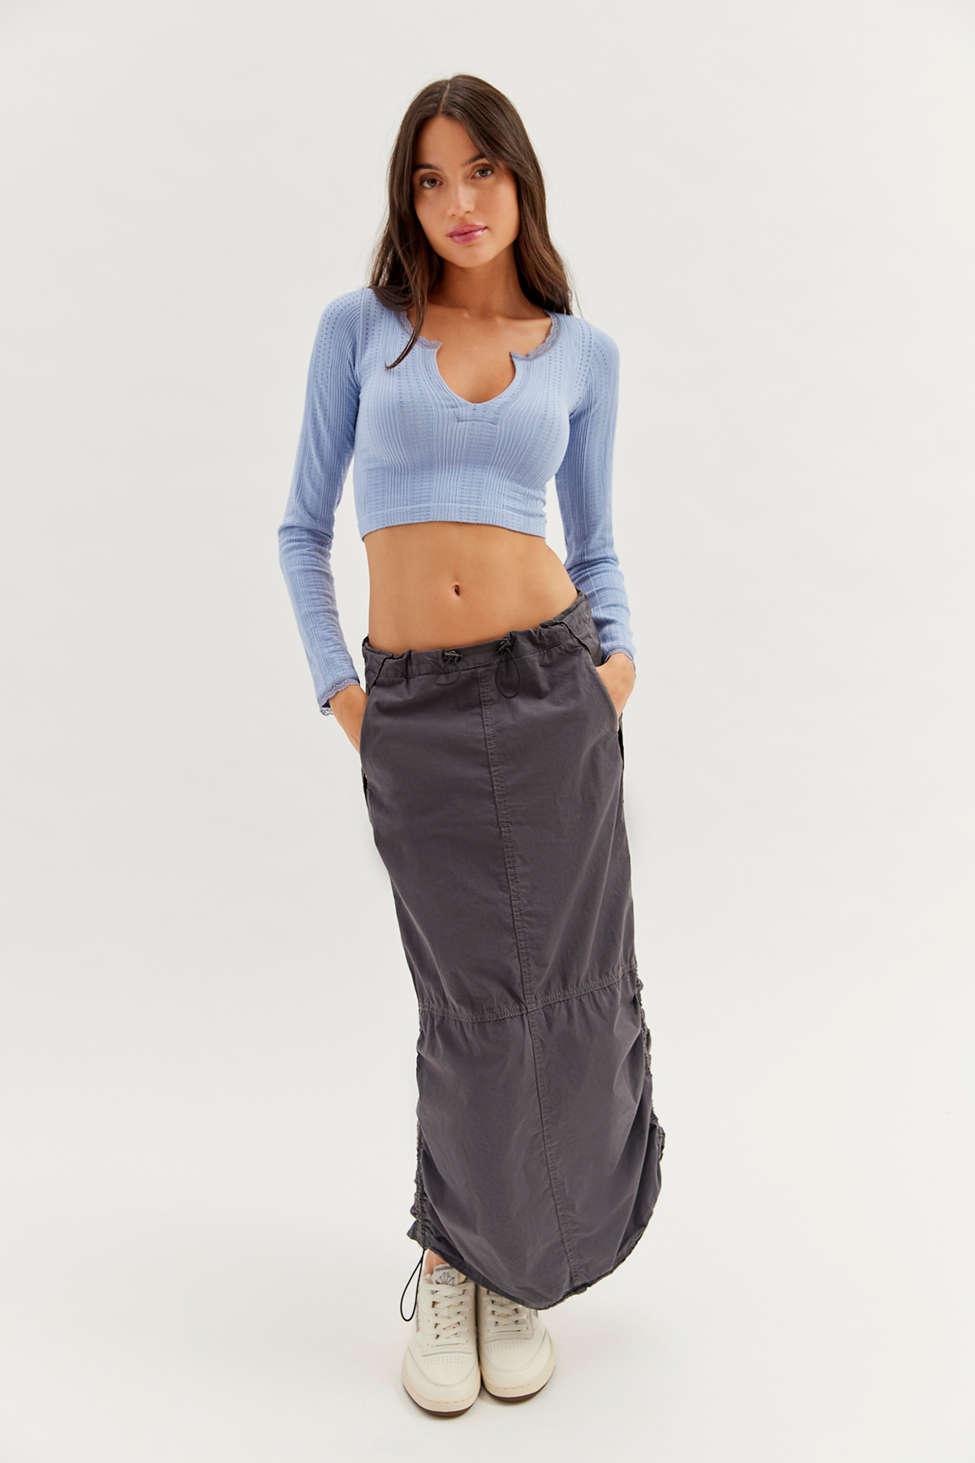 Out From Under Go For Gold Seamless Top In Gray Quill,at Urban Outfitters  in Blue